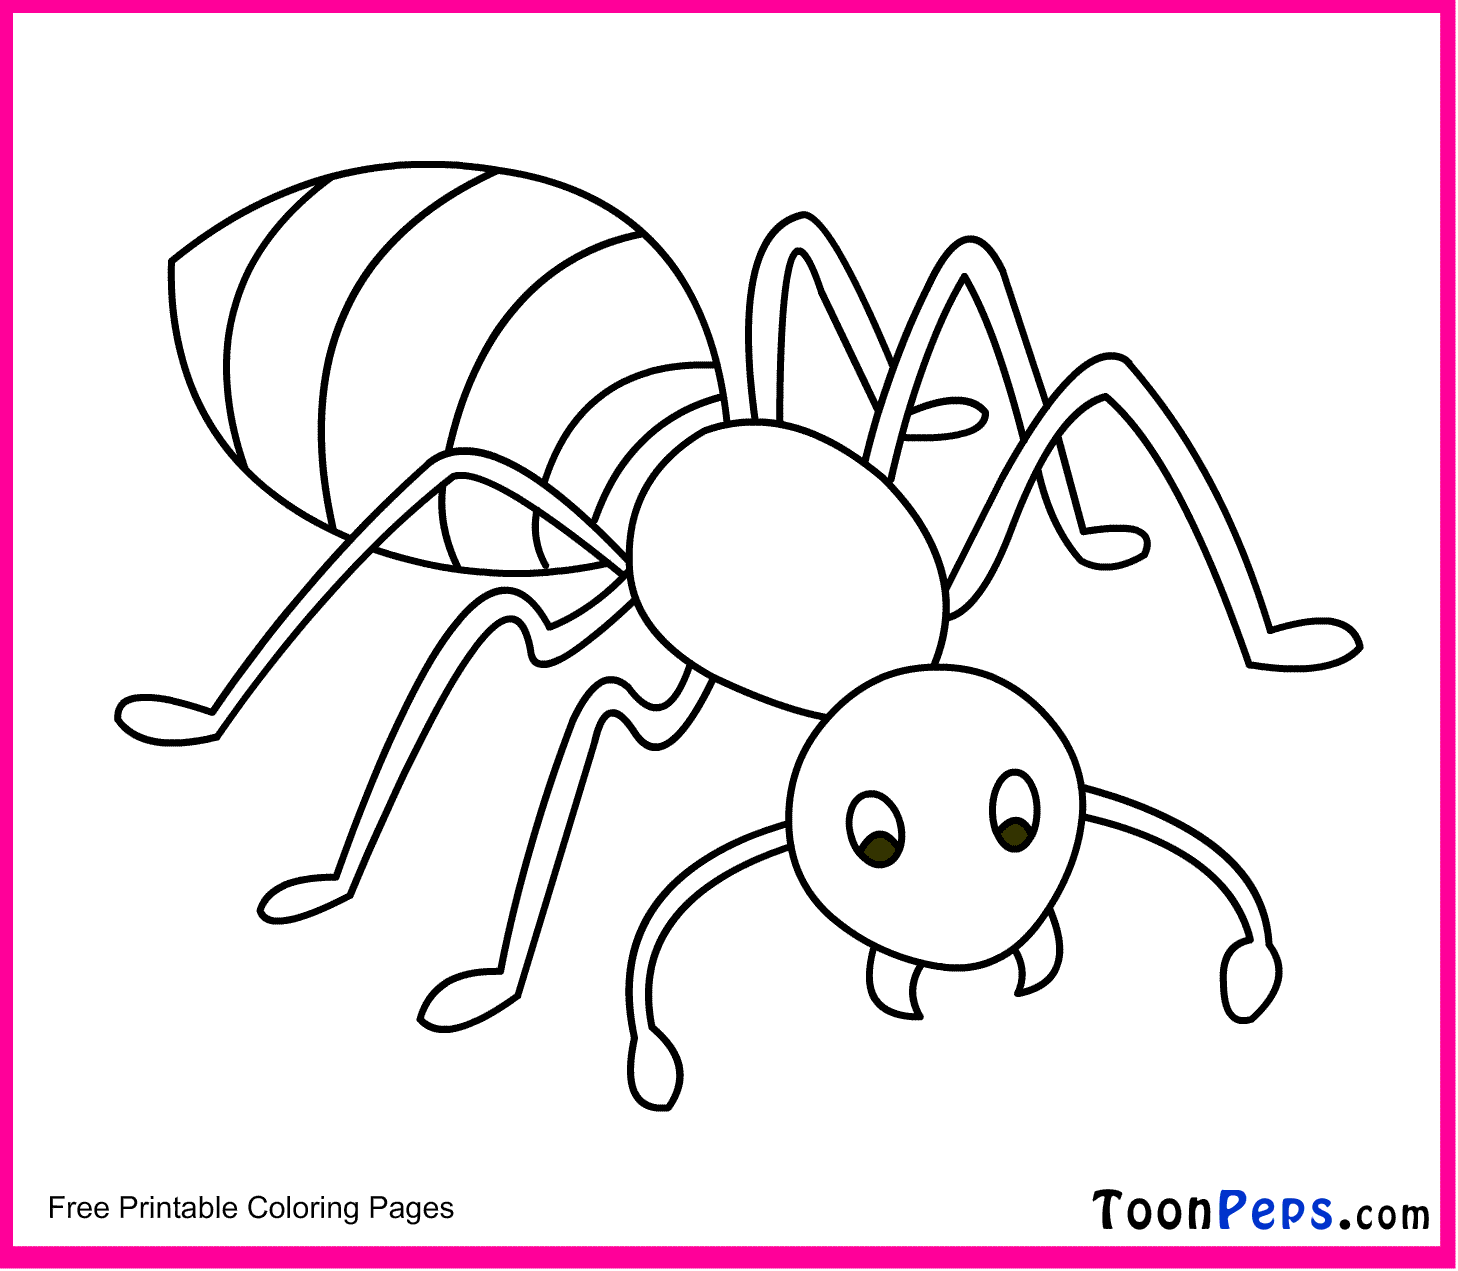 Ant Coloring Pages For Kids   Coloring Home